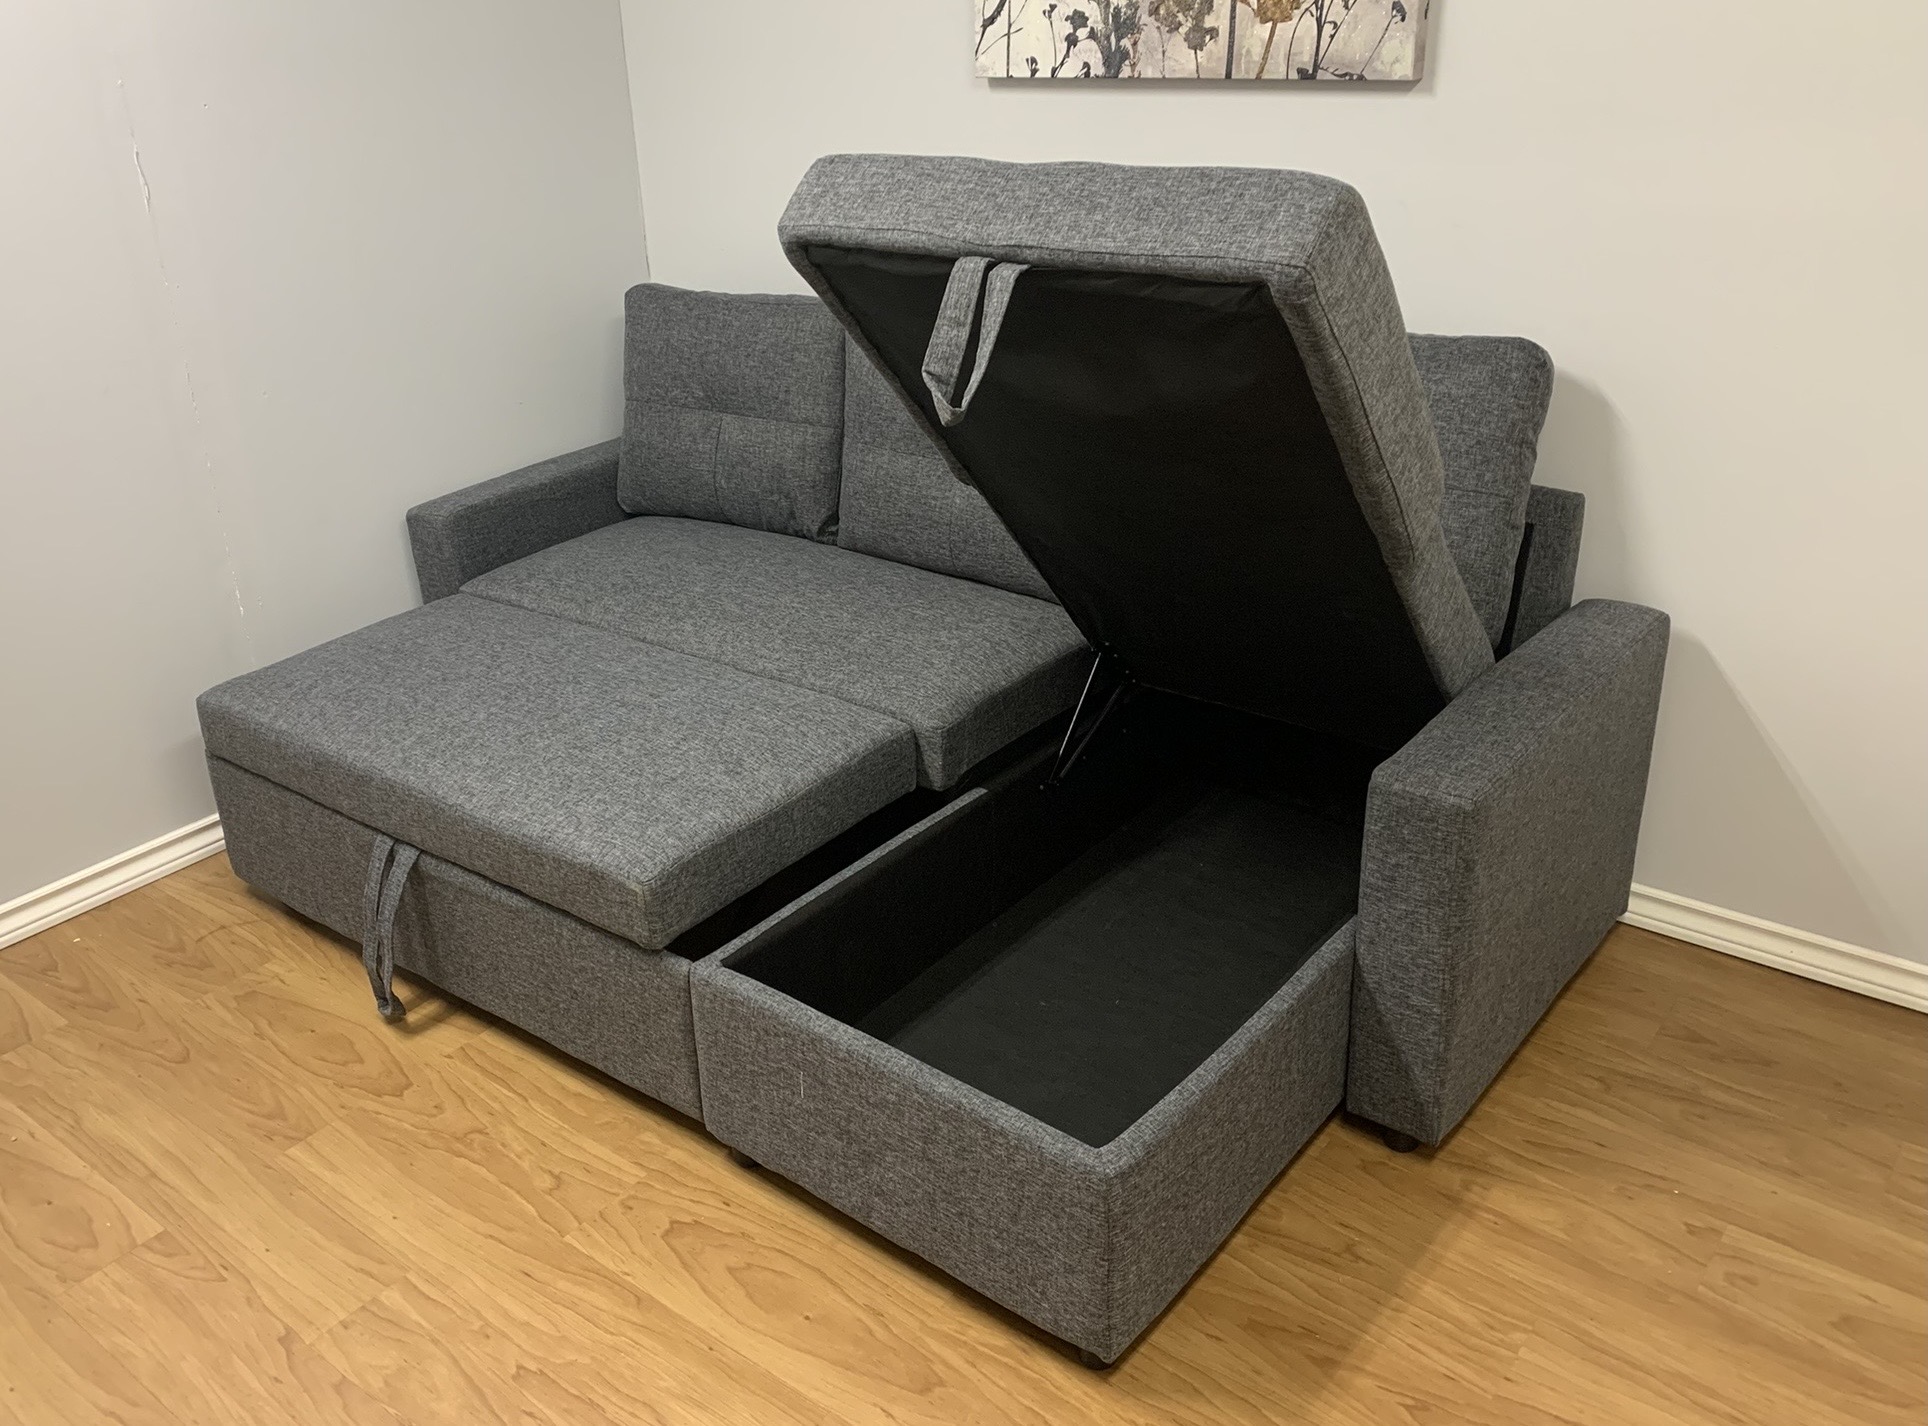 grey pull out sofa bed ashley furniture